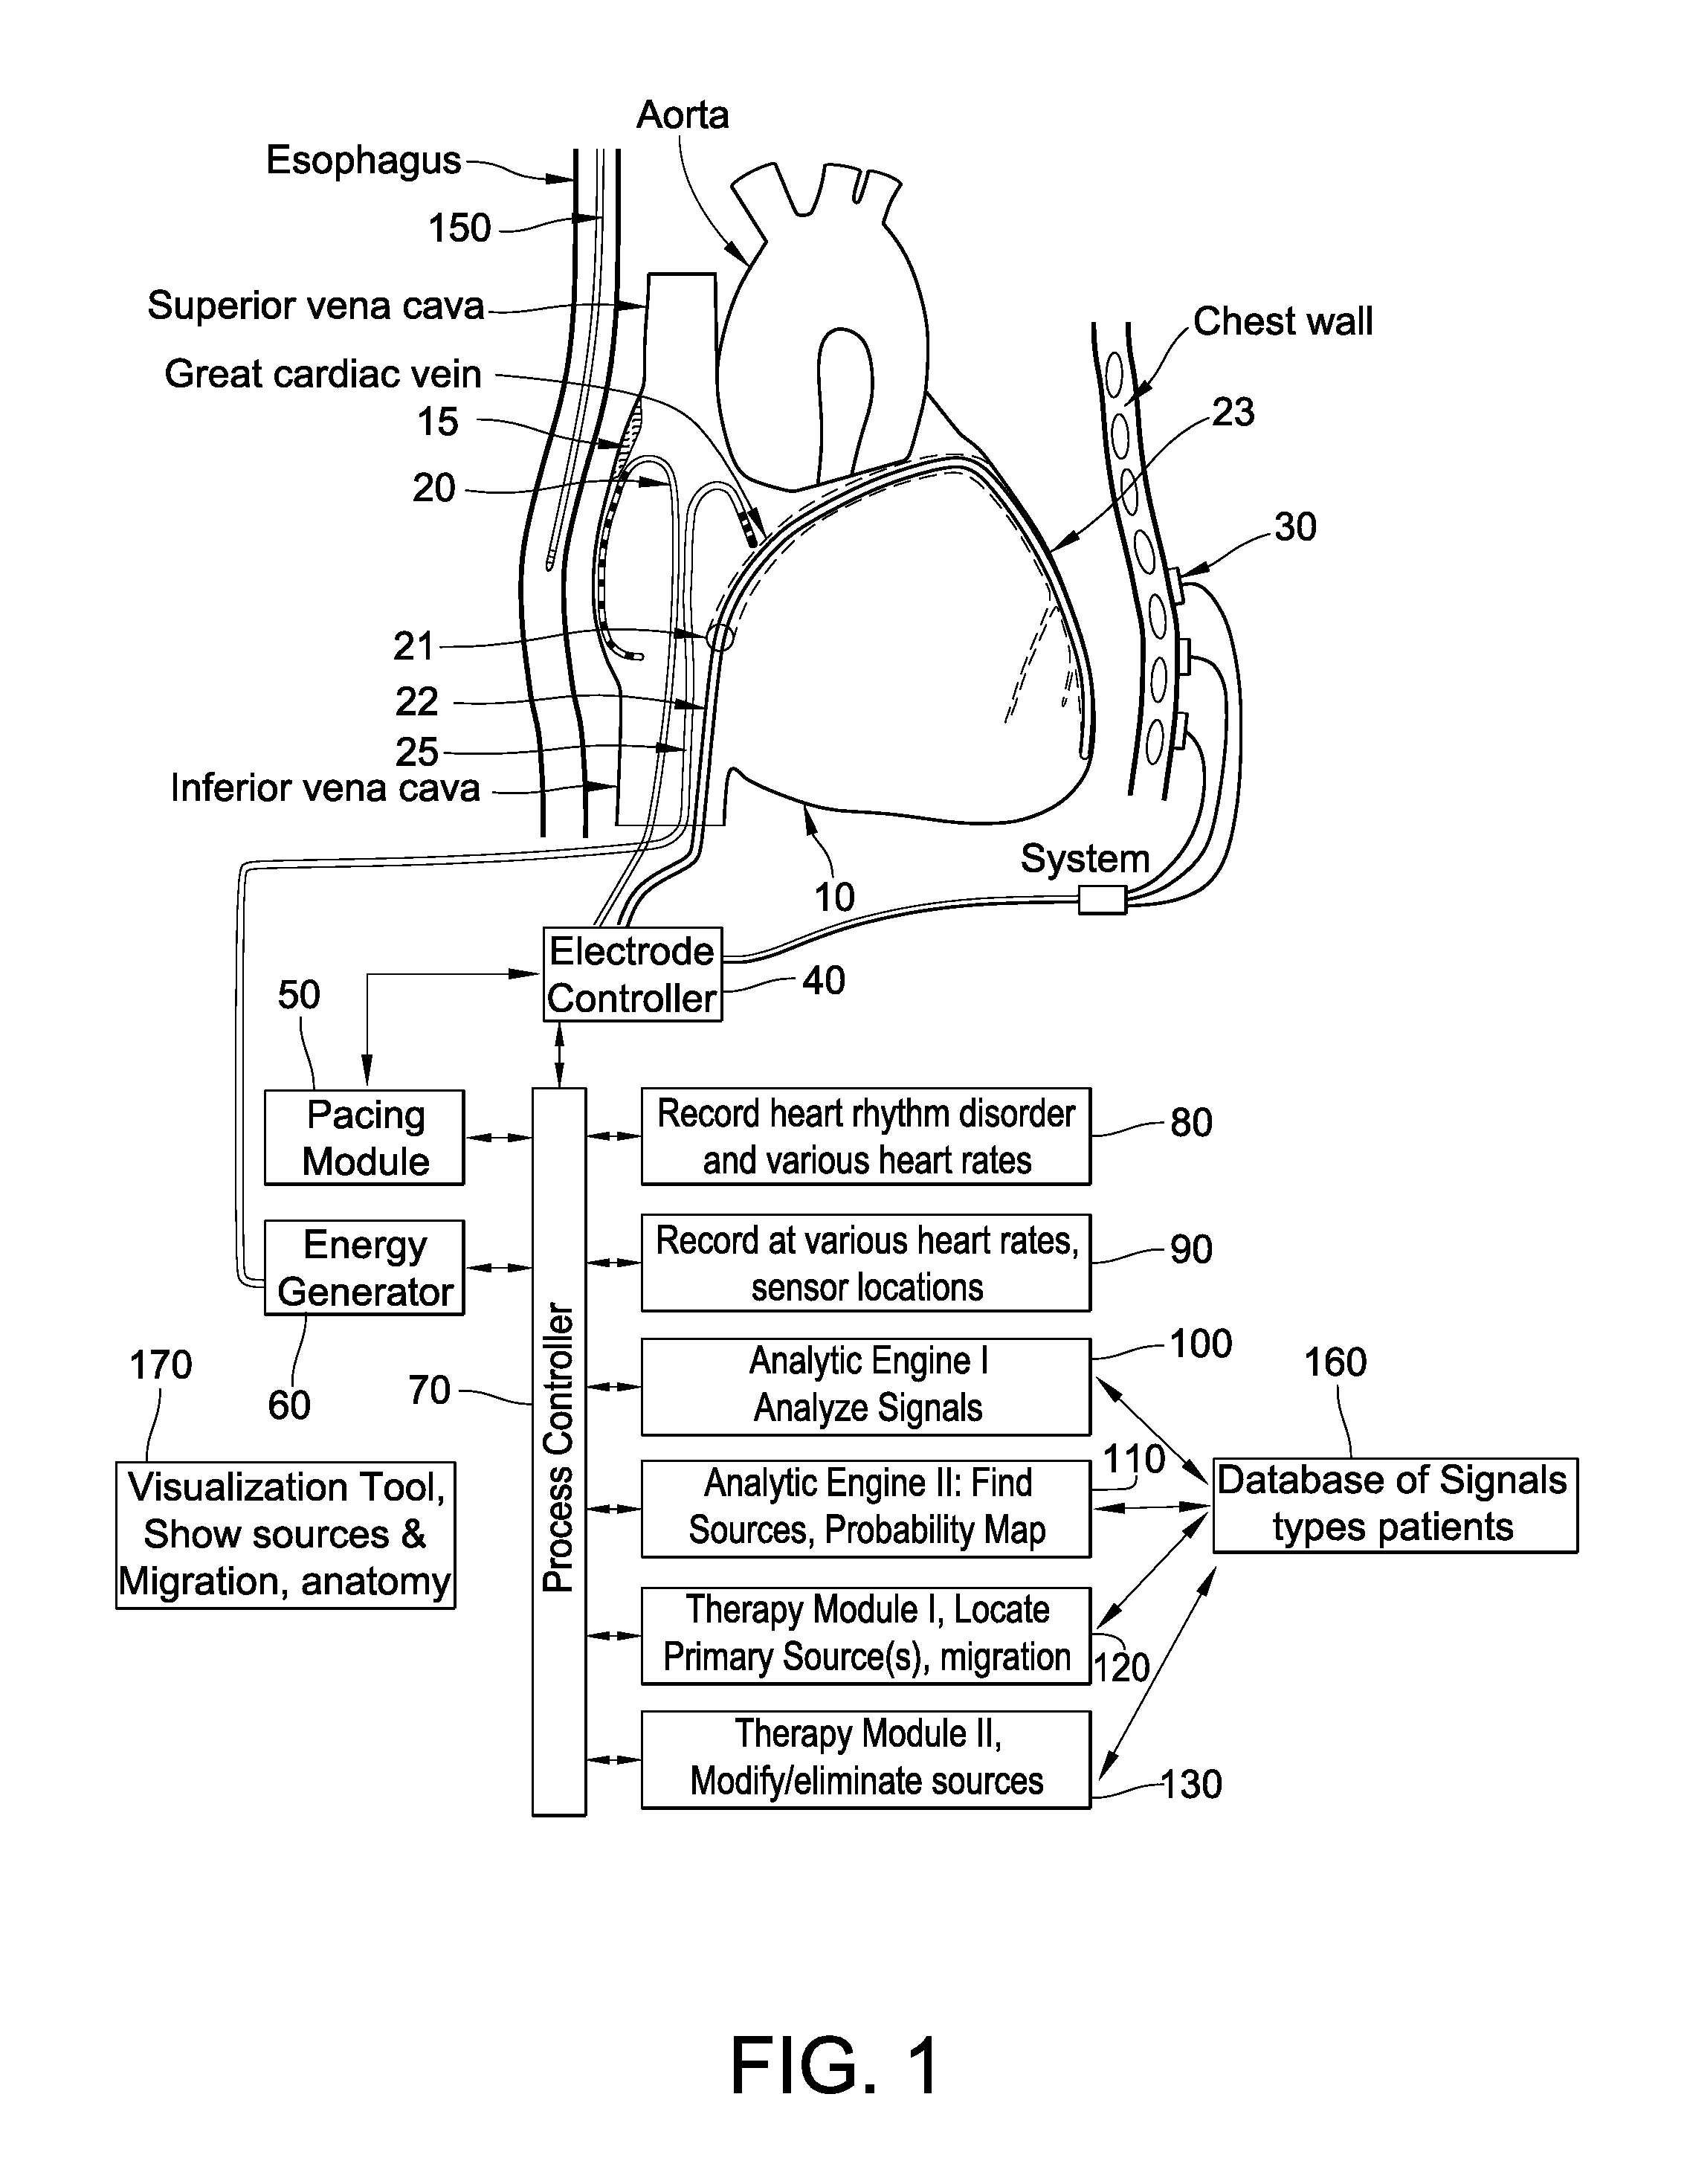 Methods, system and apparatus for the detection, diagnosis and treatment of biological rhythm disorders